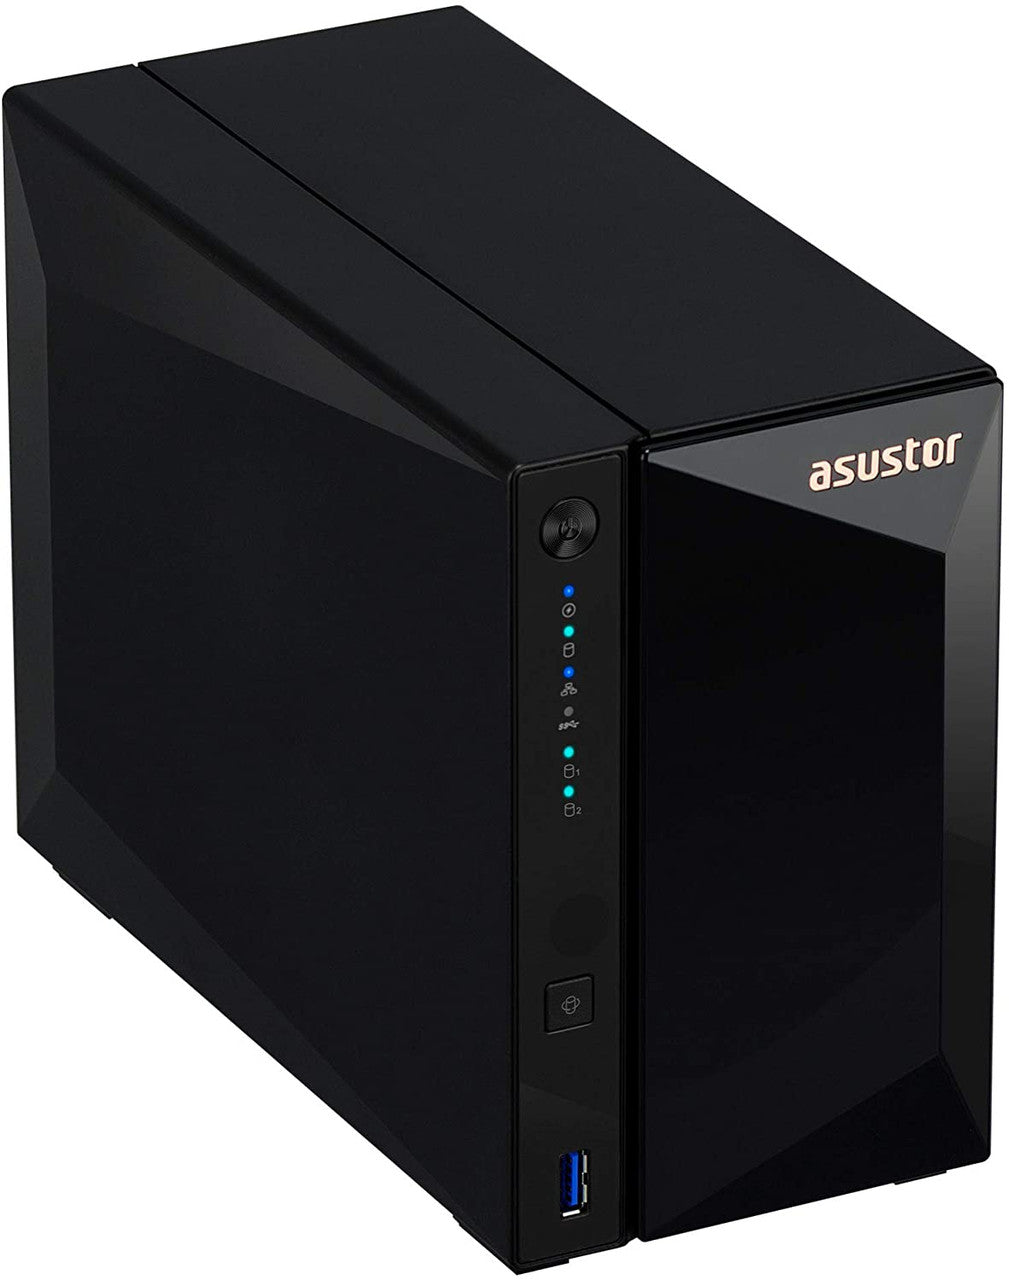 Asustor AS3302T 2-Bay Drivestor 2 PRO NAS with 2GB RAM and 36TB (2x18TB) Western Digital RED PRO Drives Fully Assembled and Tested